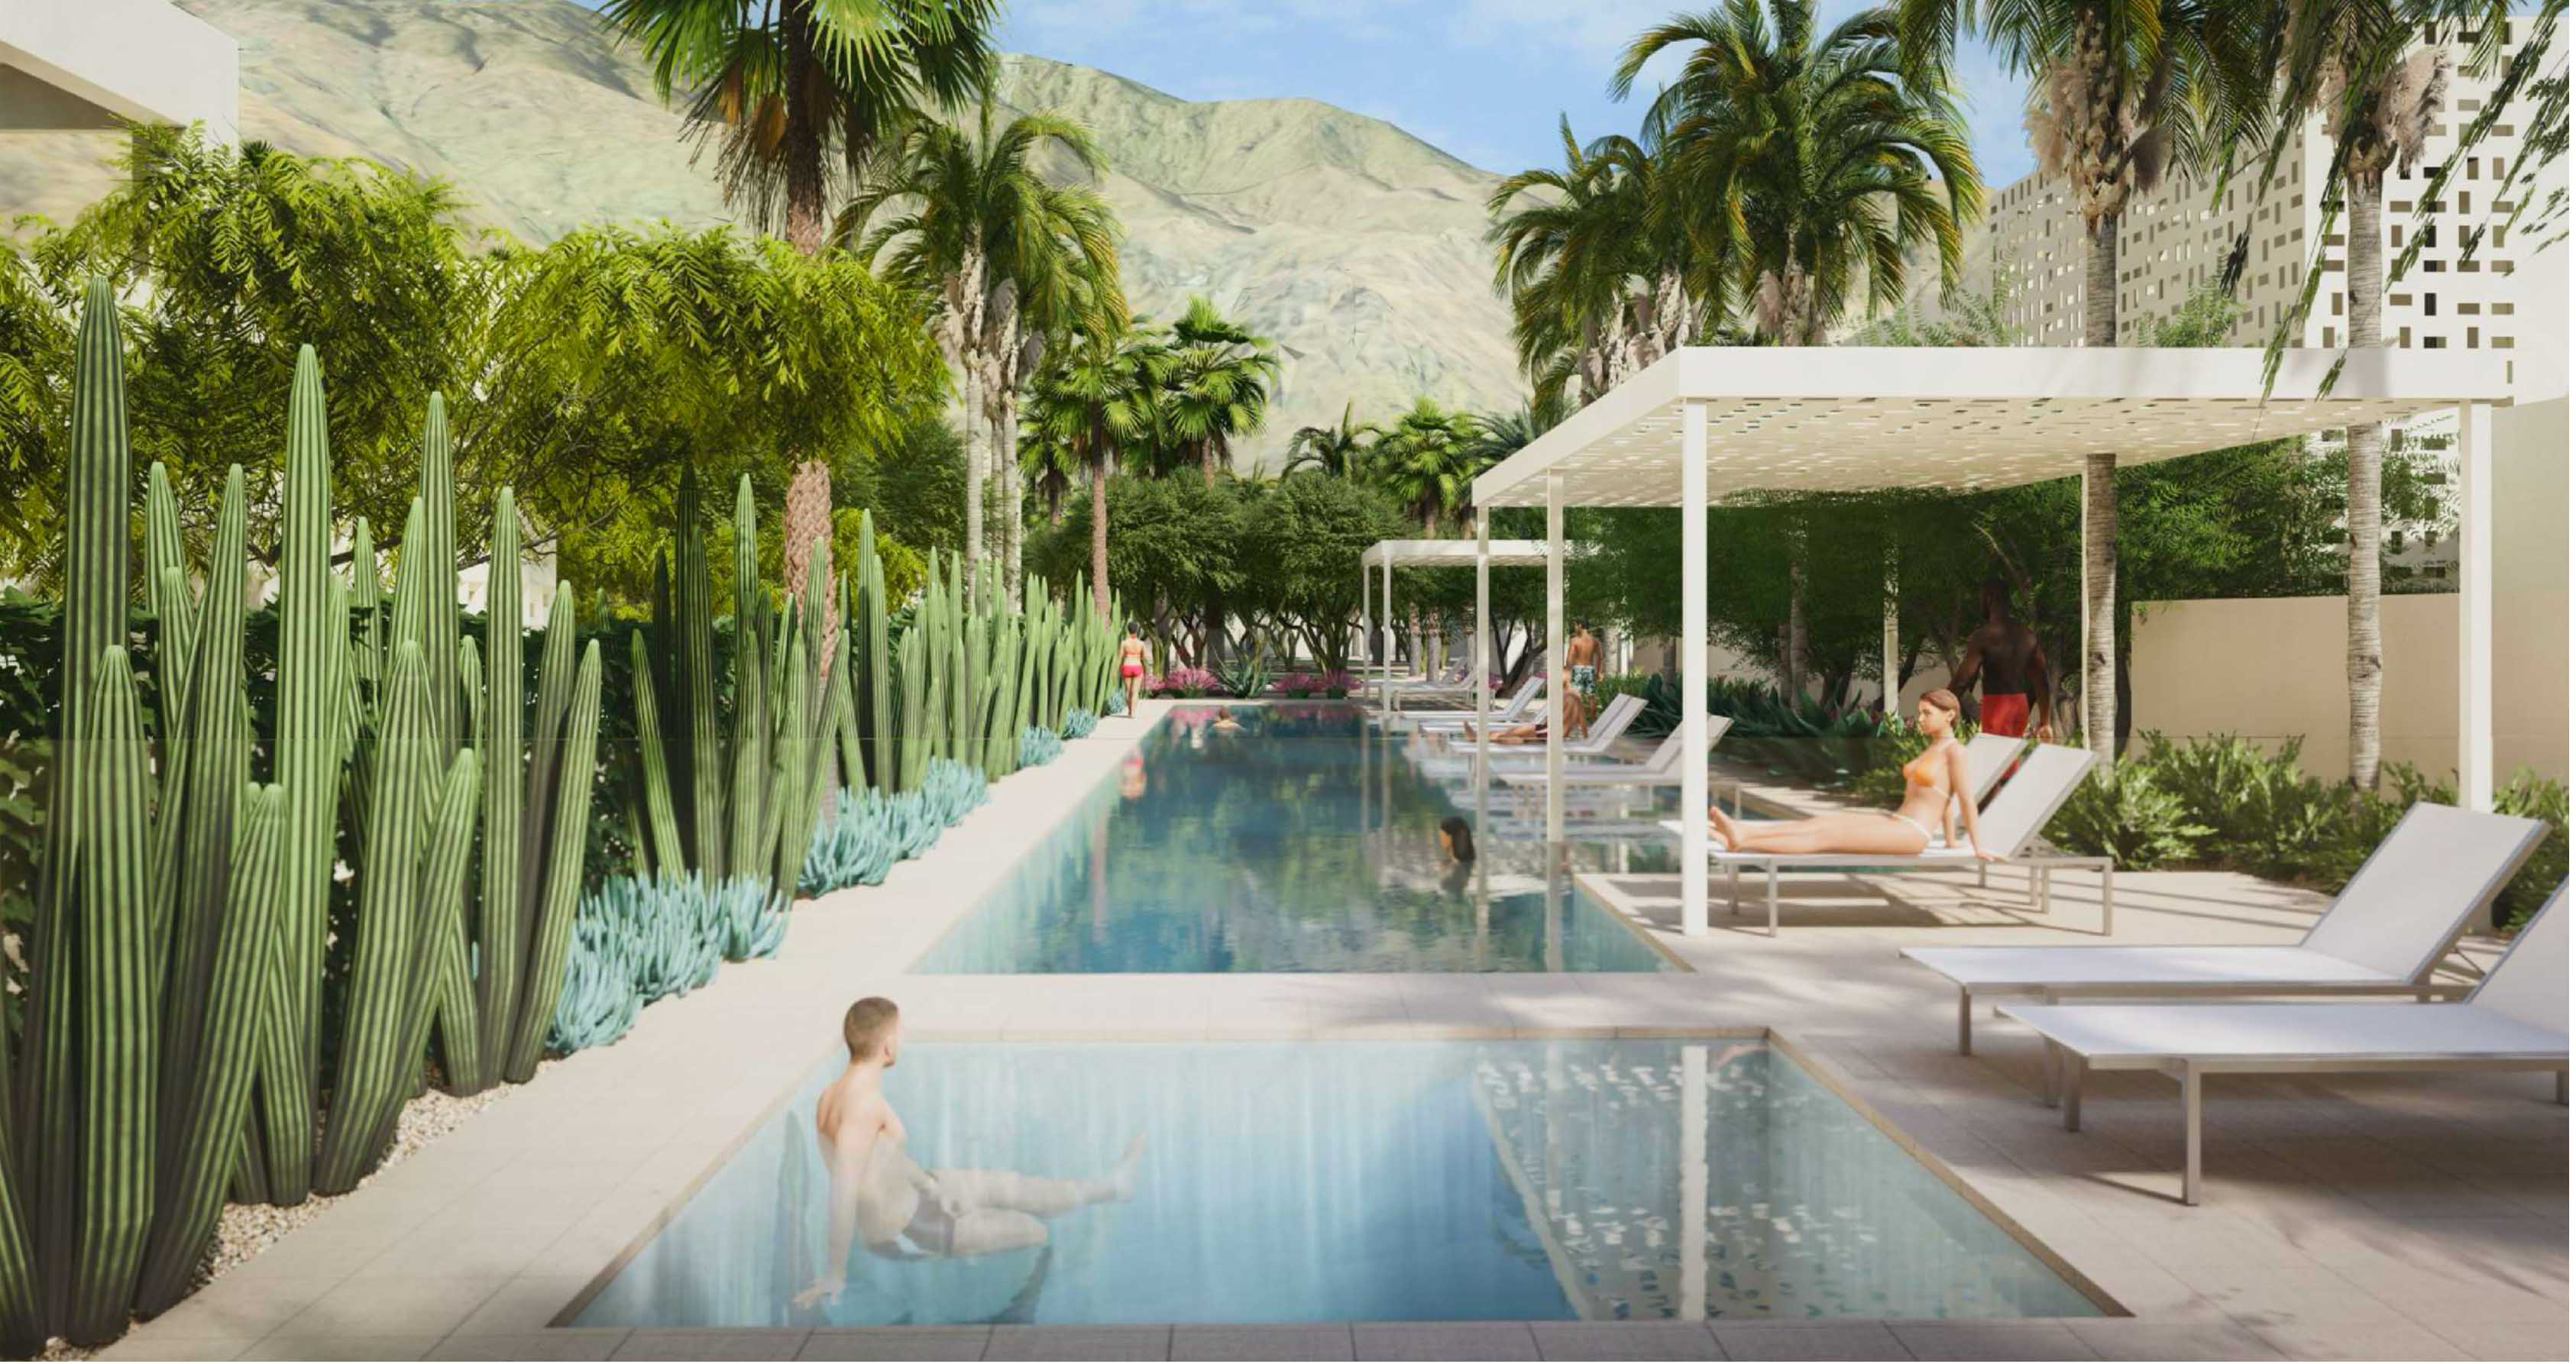 People lounging by the pool surrounded by nature with a view of the mountains